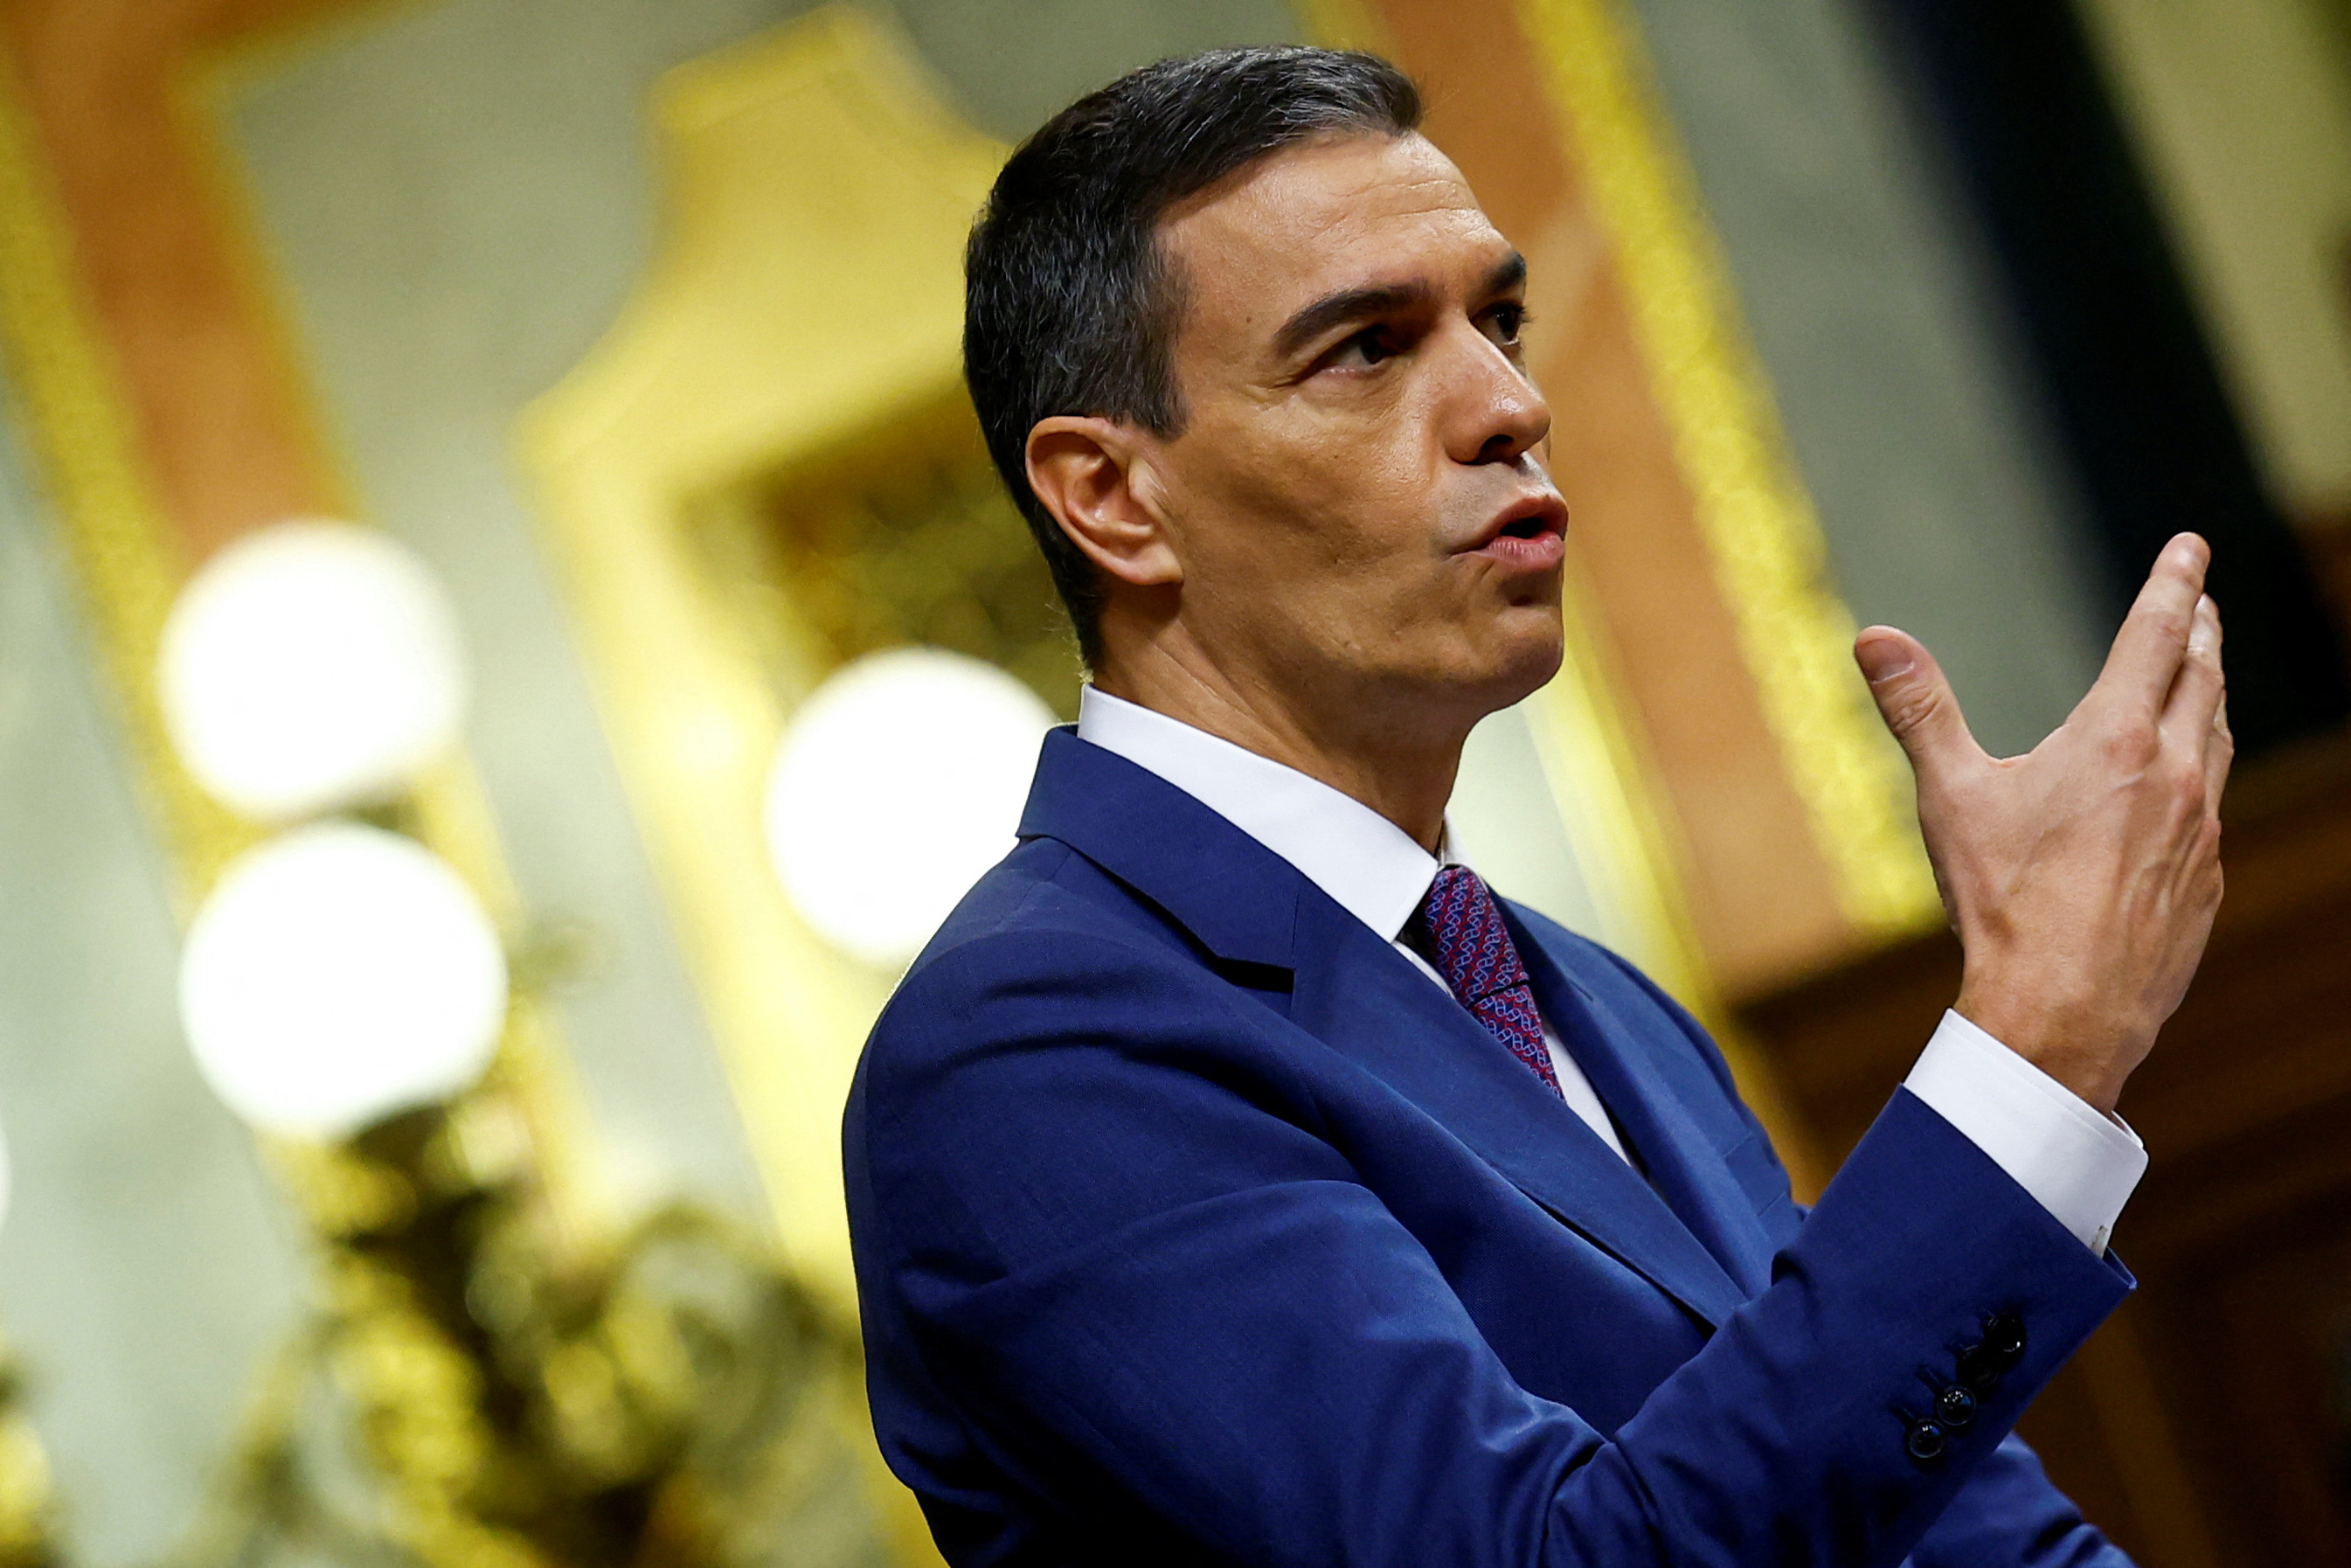 Spanish PM Pedro Sanchez says he suspects Israel has broken international law, given the high number of civilian casualties in Gaza. /Susana Vera/Reuters